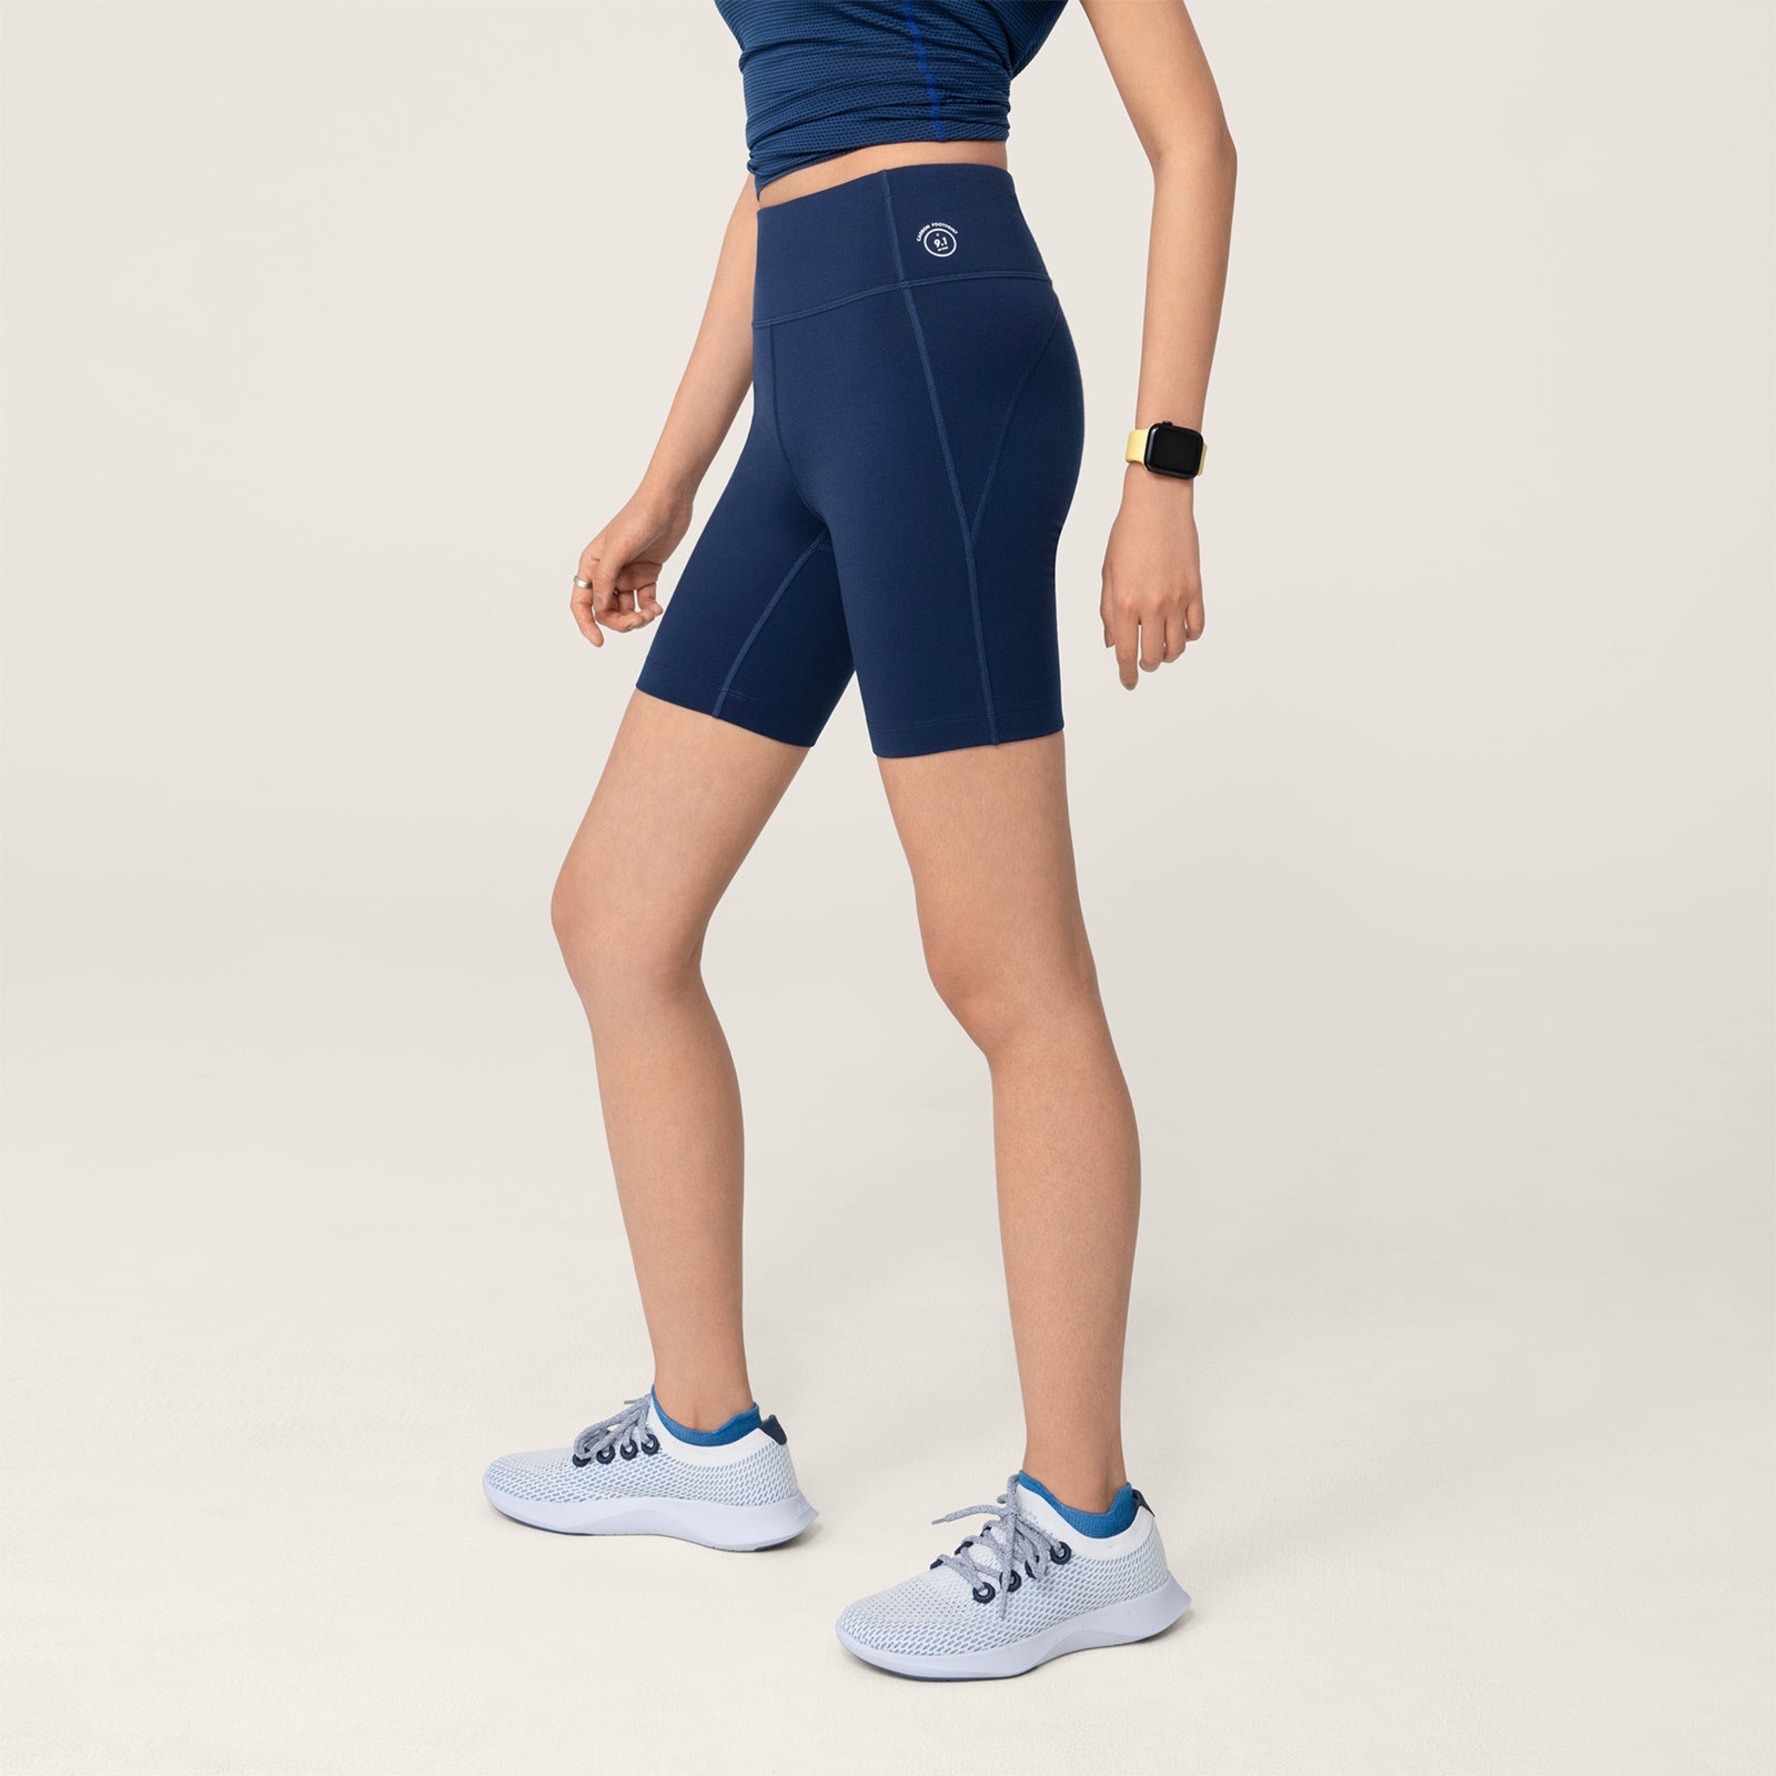 Allbirds Launches Sustainable Workout Clothes Review